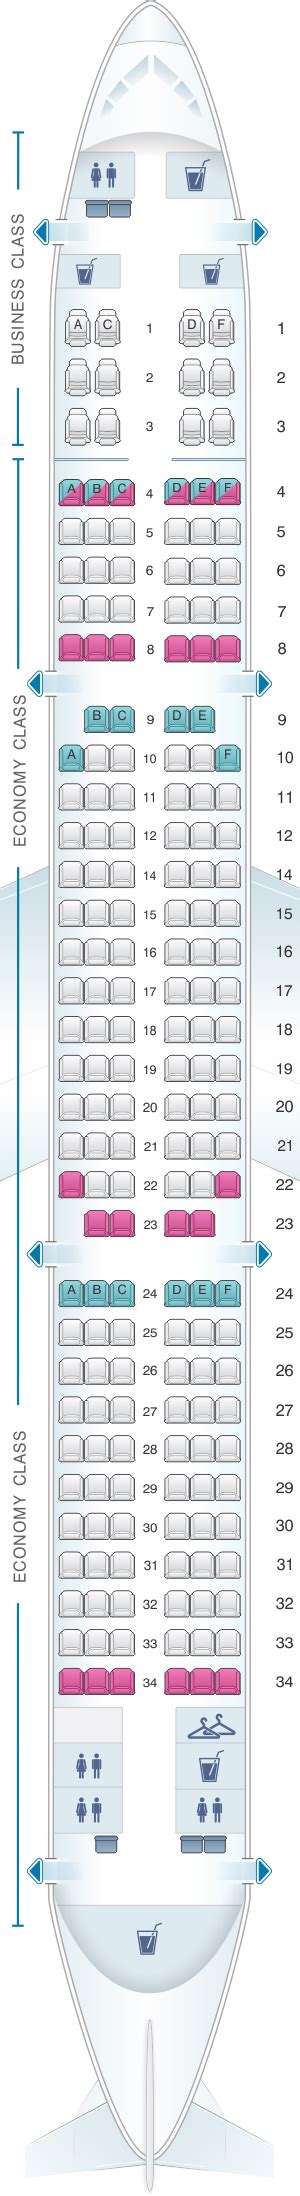 Seat Map Turkish Airlines Airbus A321 200 Allegiant Air Airline Hot